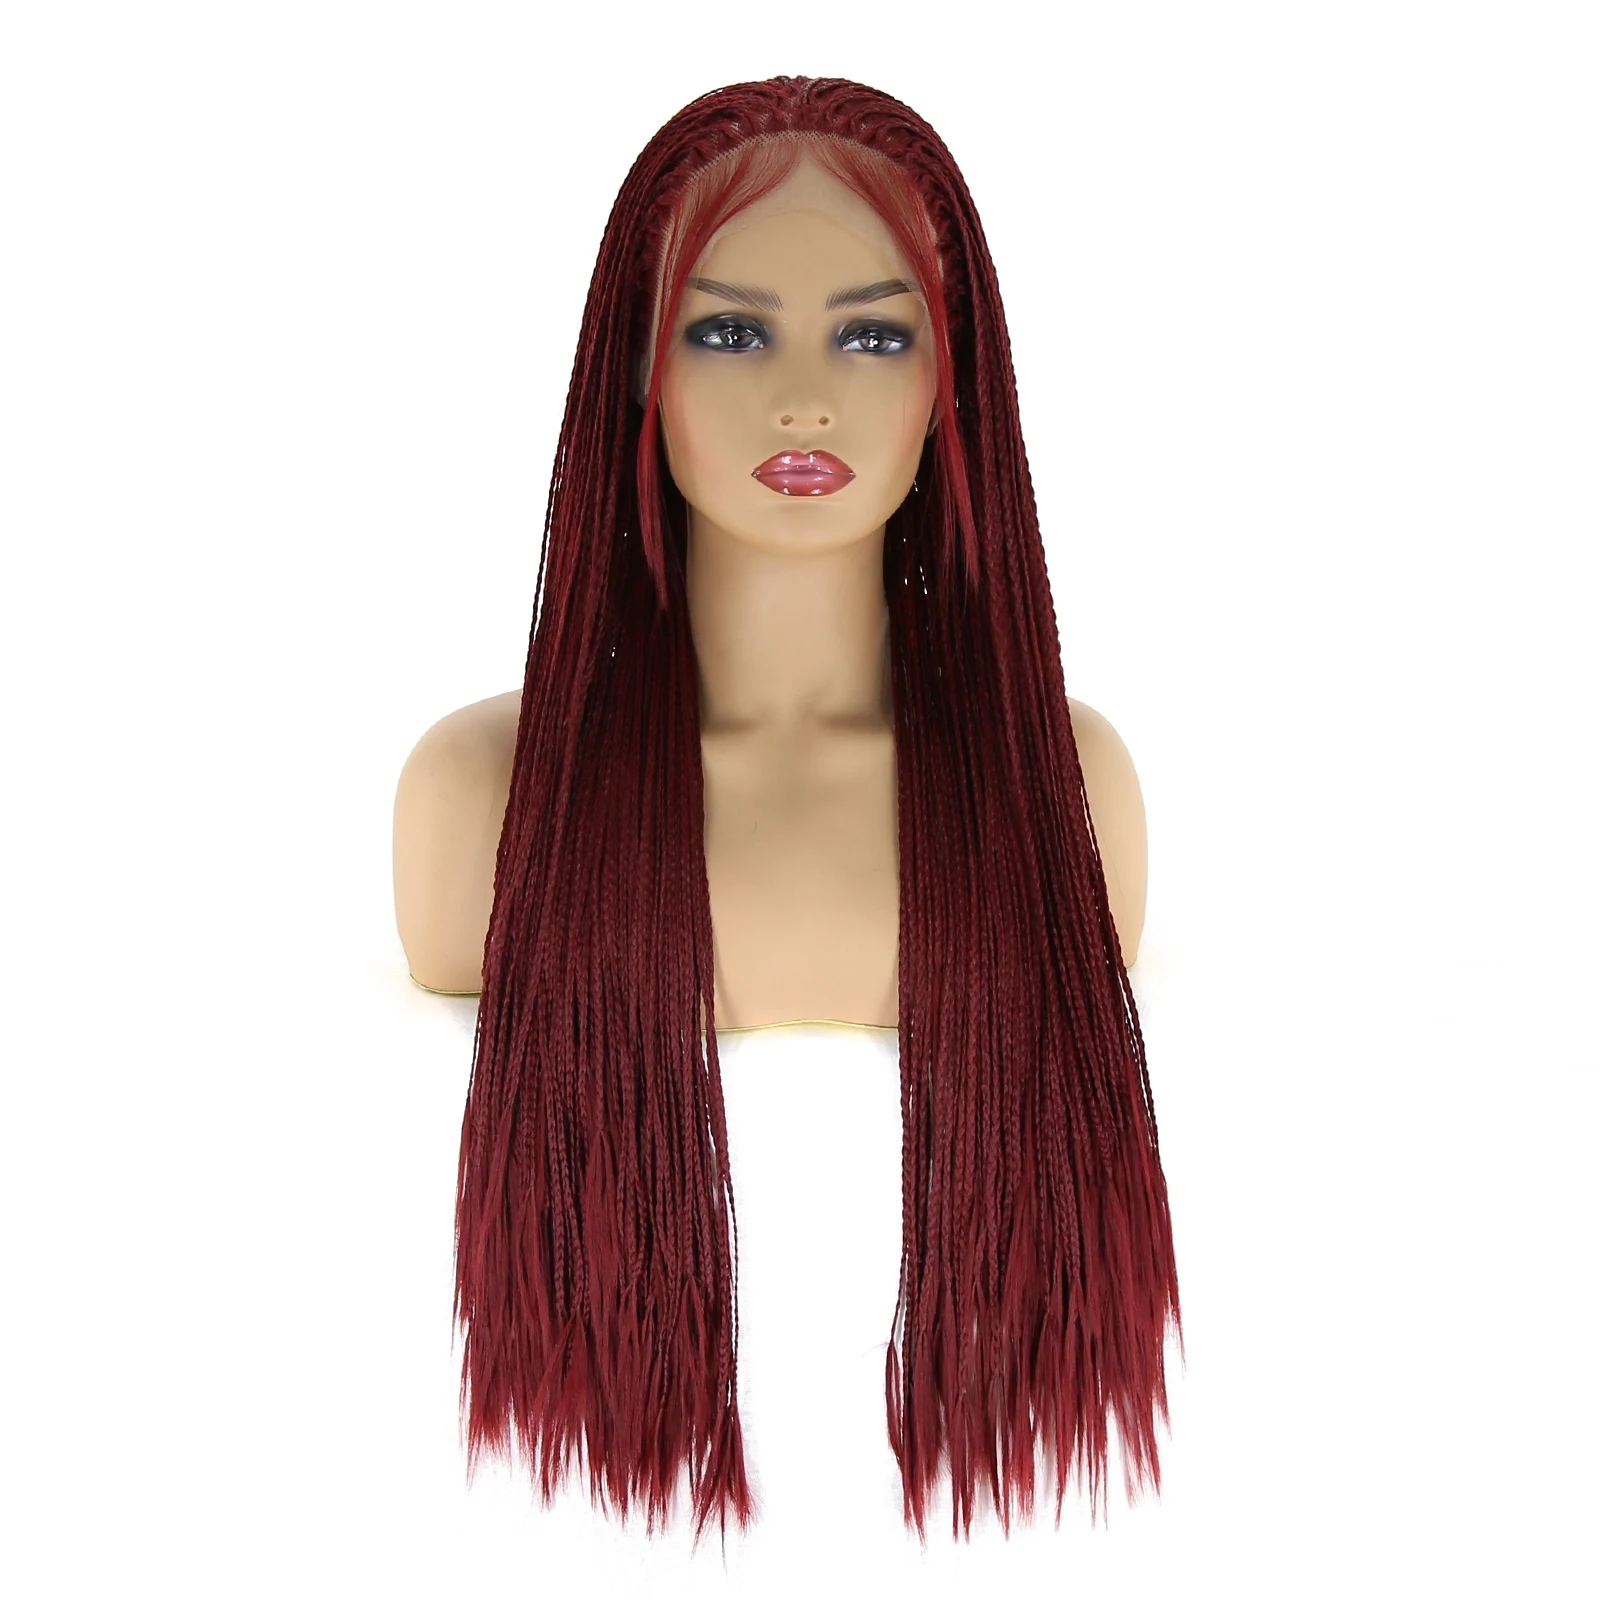 BTWTRY Wine Red Synthetic Lace Front Braided Wig for Black Women Braided with Baby Hair Heat Resistant Fiber Hair